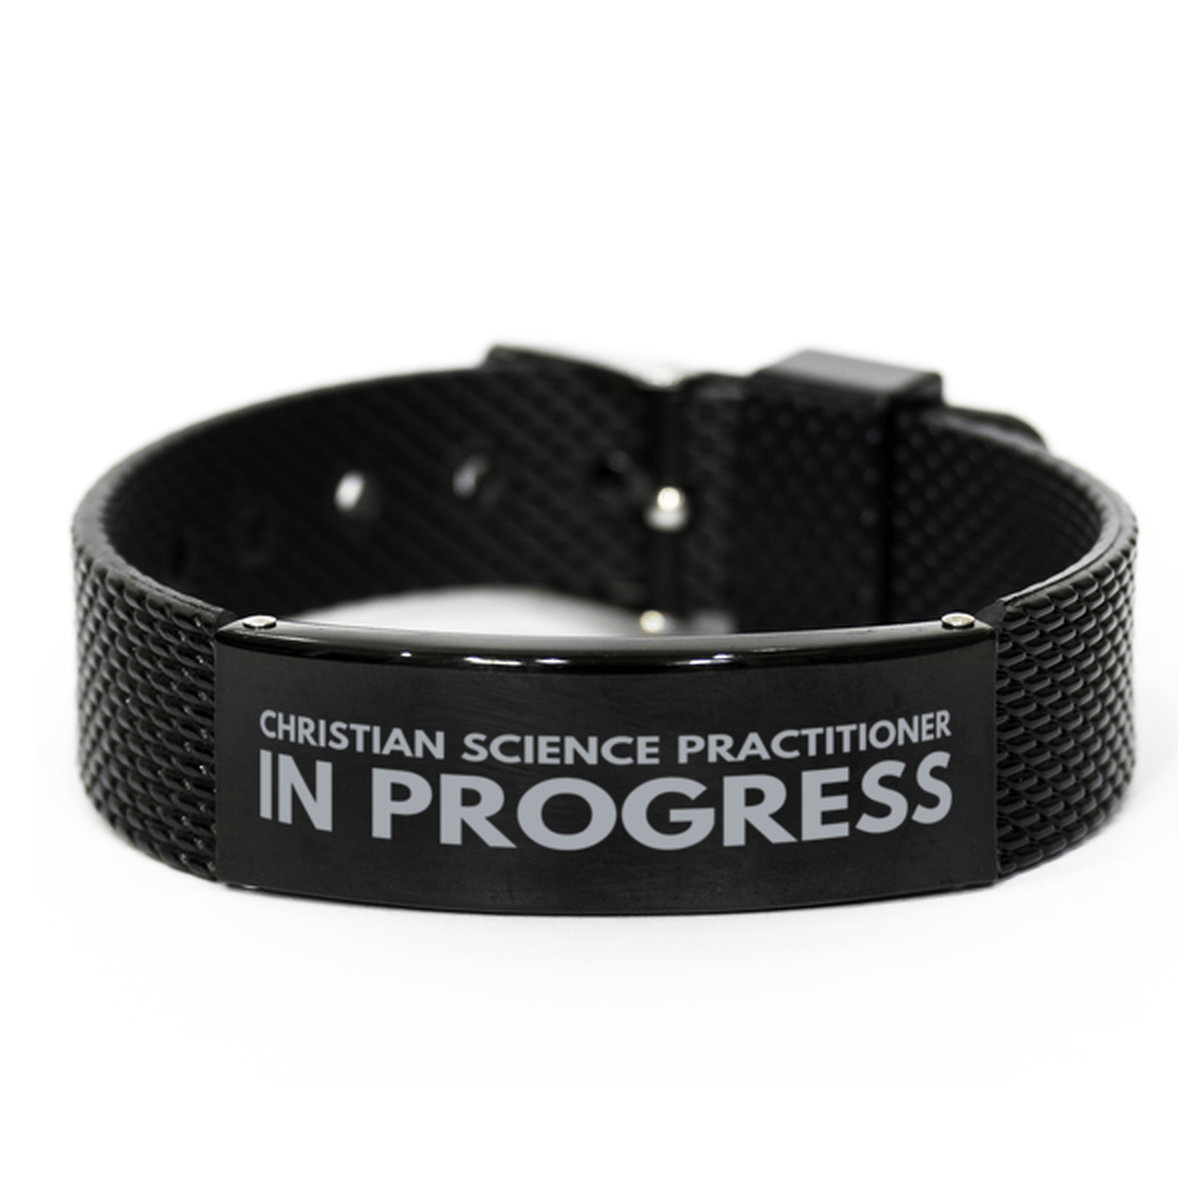 Inspirational Christian Science Practitioner Black Shark Mesh Bracelet, Christian Science Practitioner In Progress, Best Graduation Gifts for Students